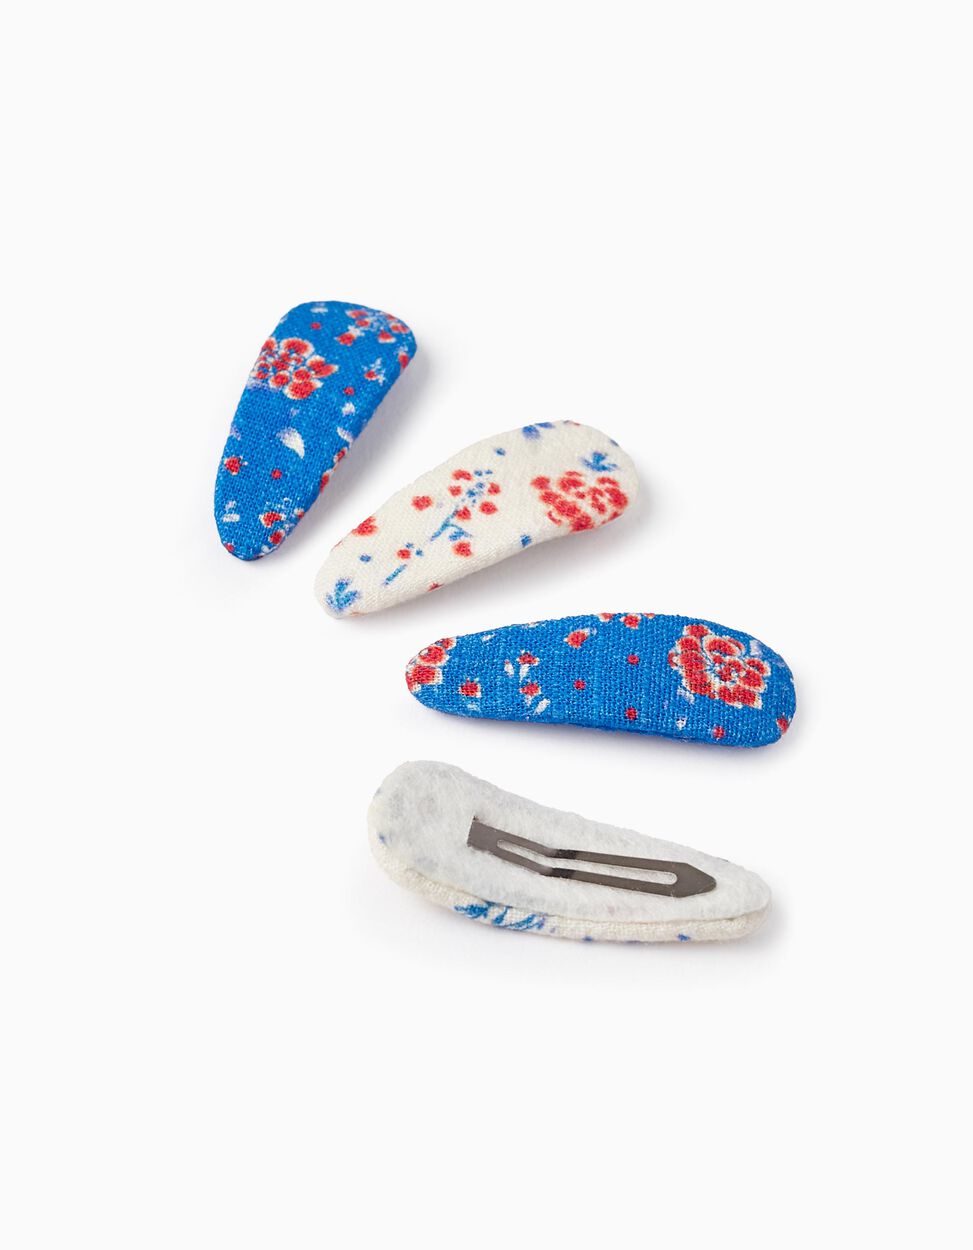 Buy Online Pack of 4 Hair Clips with Floral Pattern for Baby Girls, Dark Blue/White